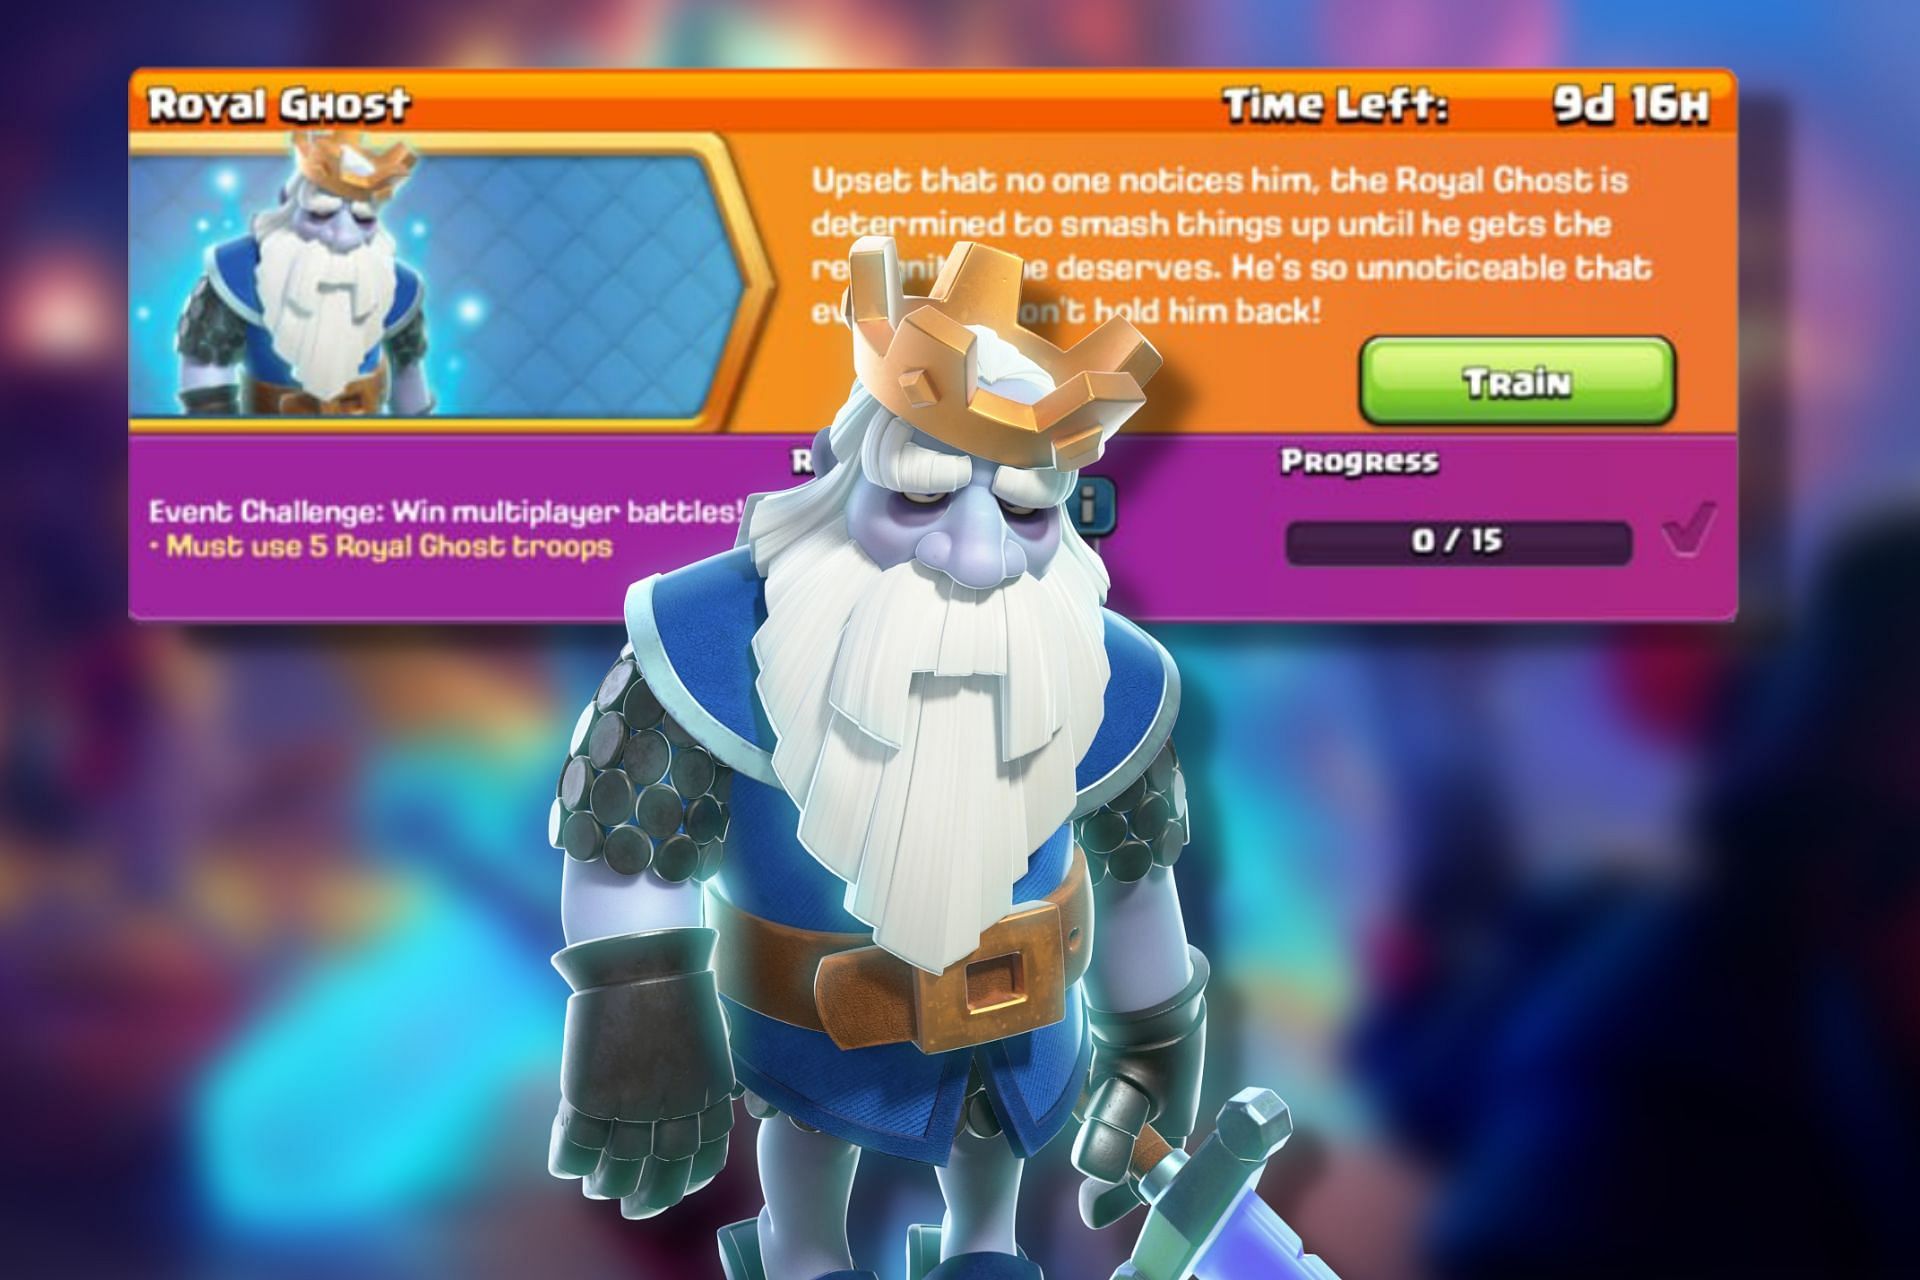 Royal Ghost Challenge in Clash of Clans Information, rewards, and more